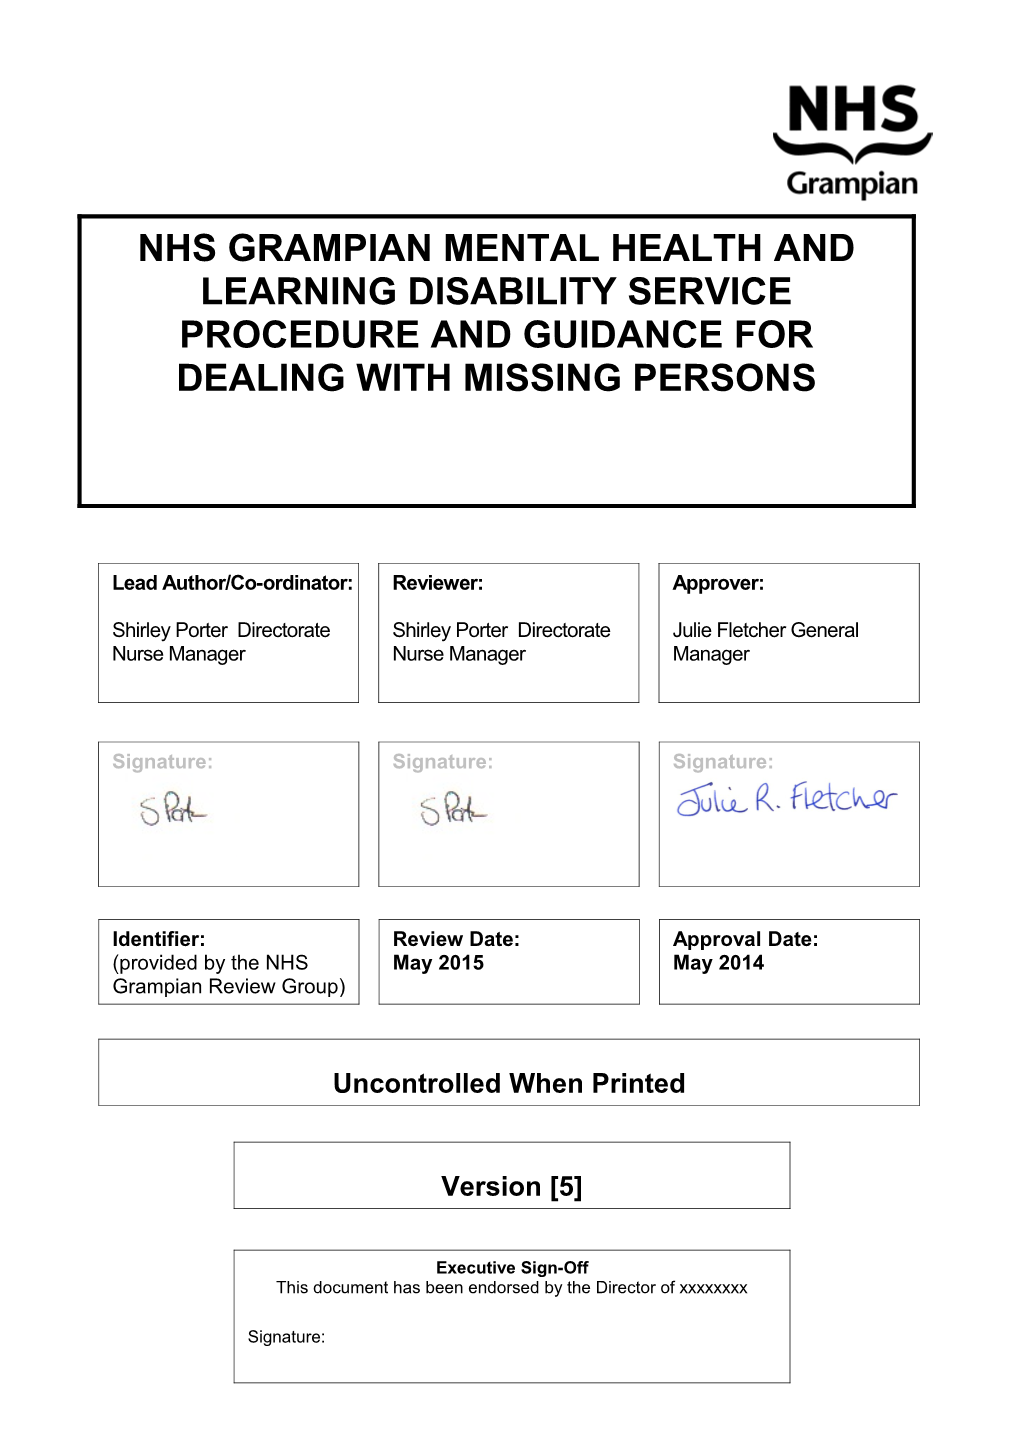 NHS Grampian Mental Health and Learning Disability Service Procedure and Guidance for Dealing